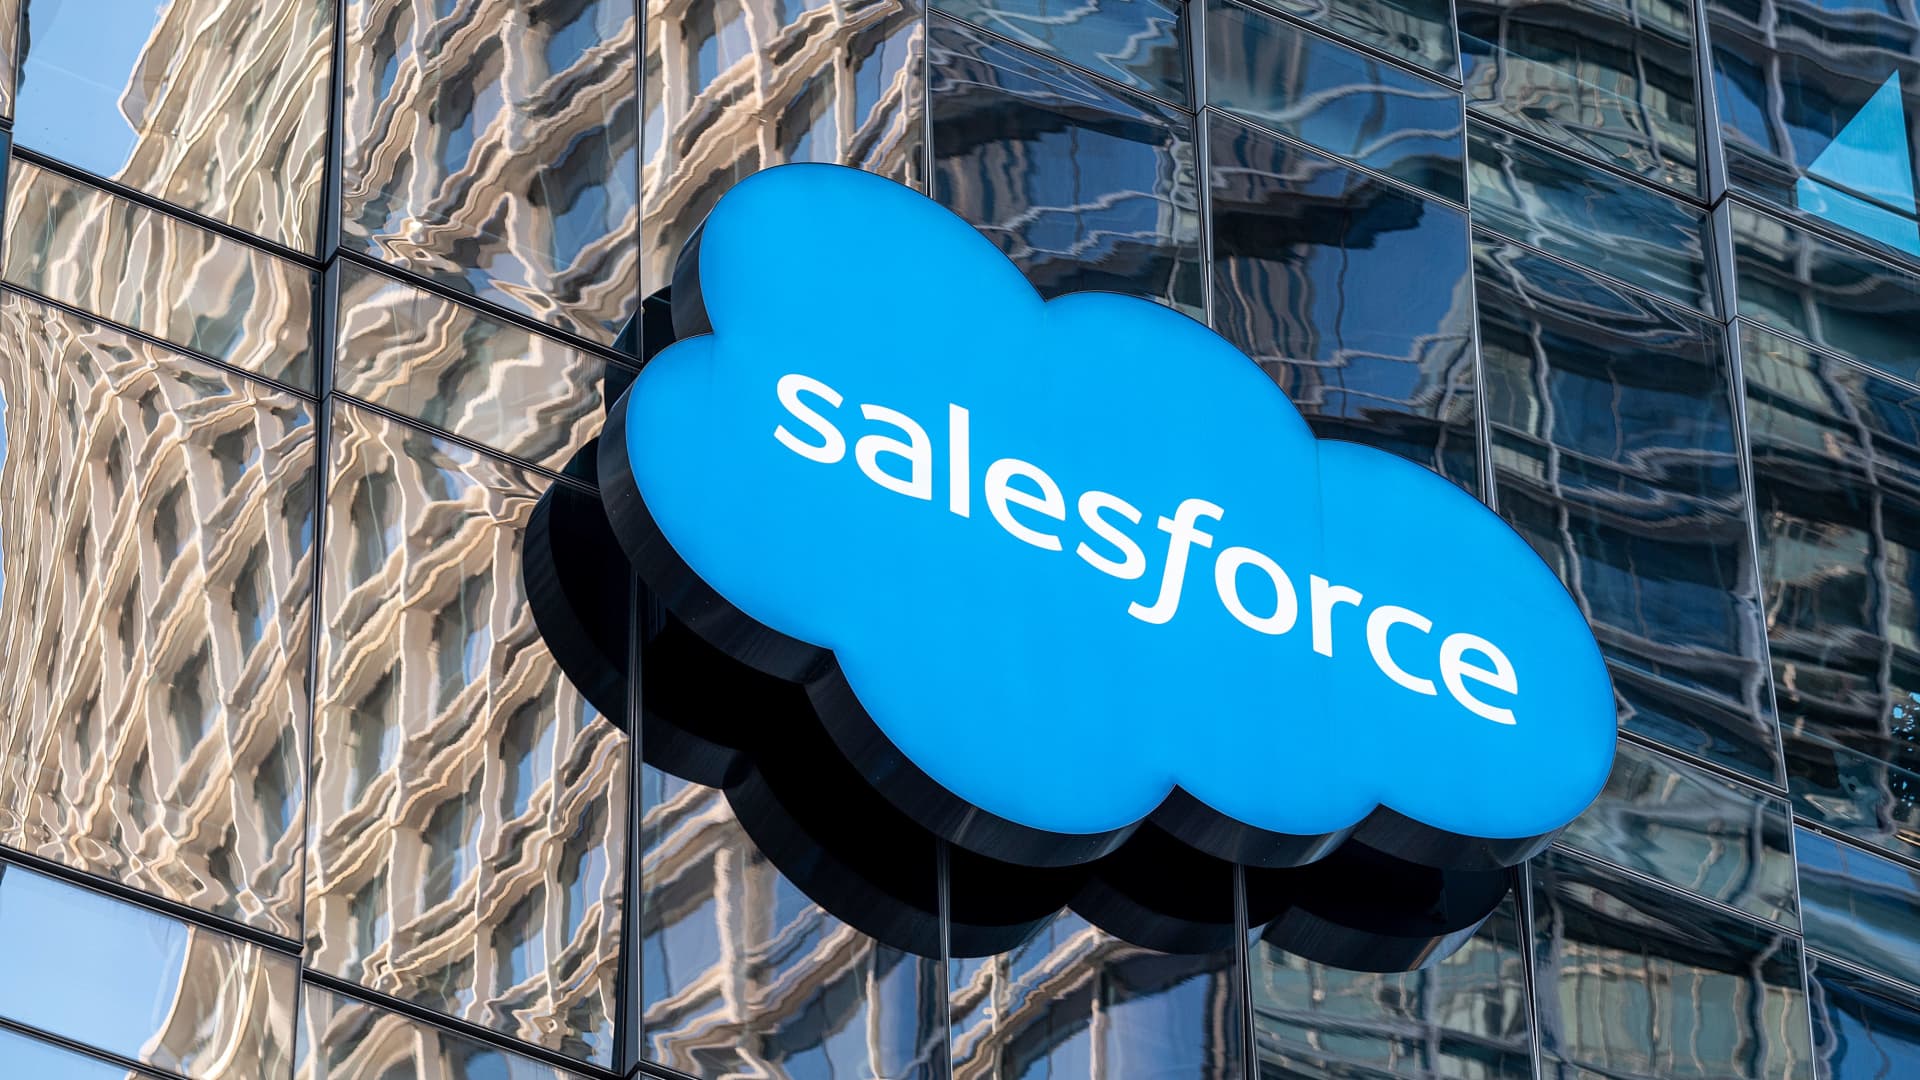 Salesforce shakes up its board, a much-needed move amid executive, activist turmoil